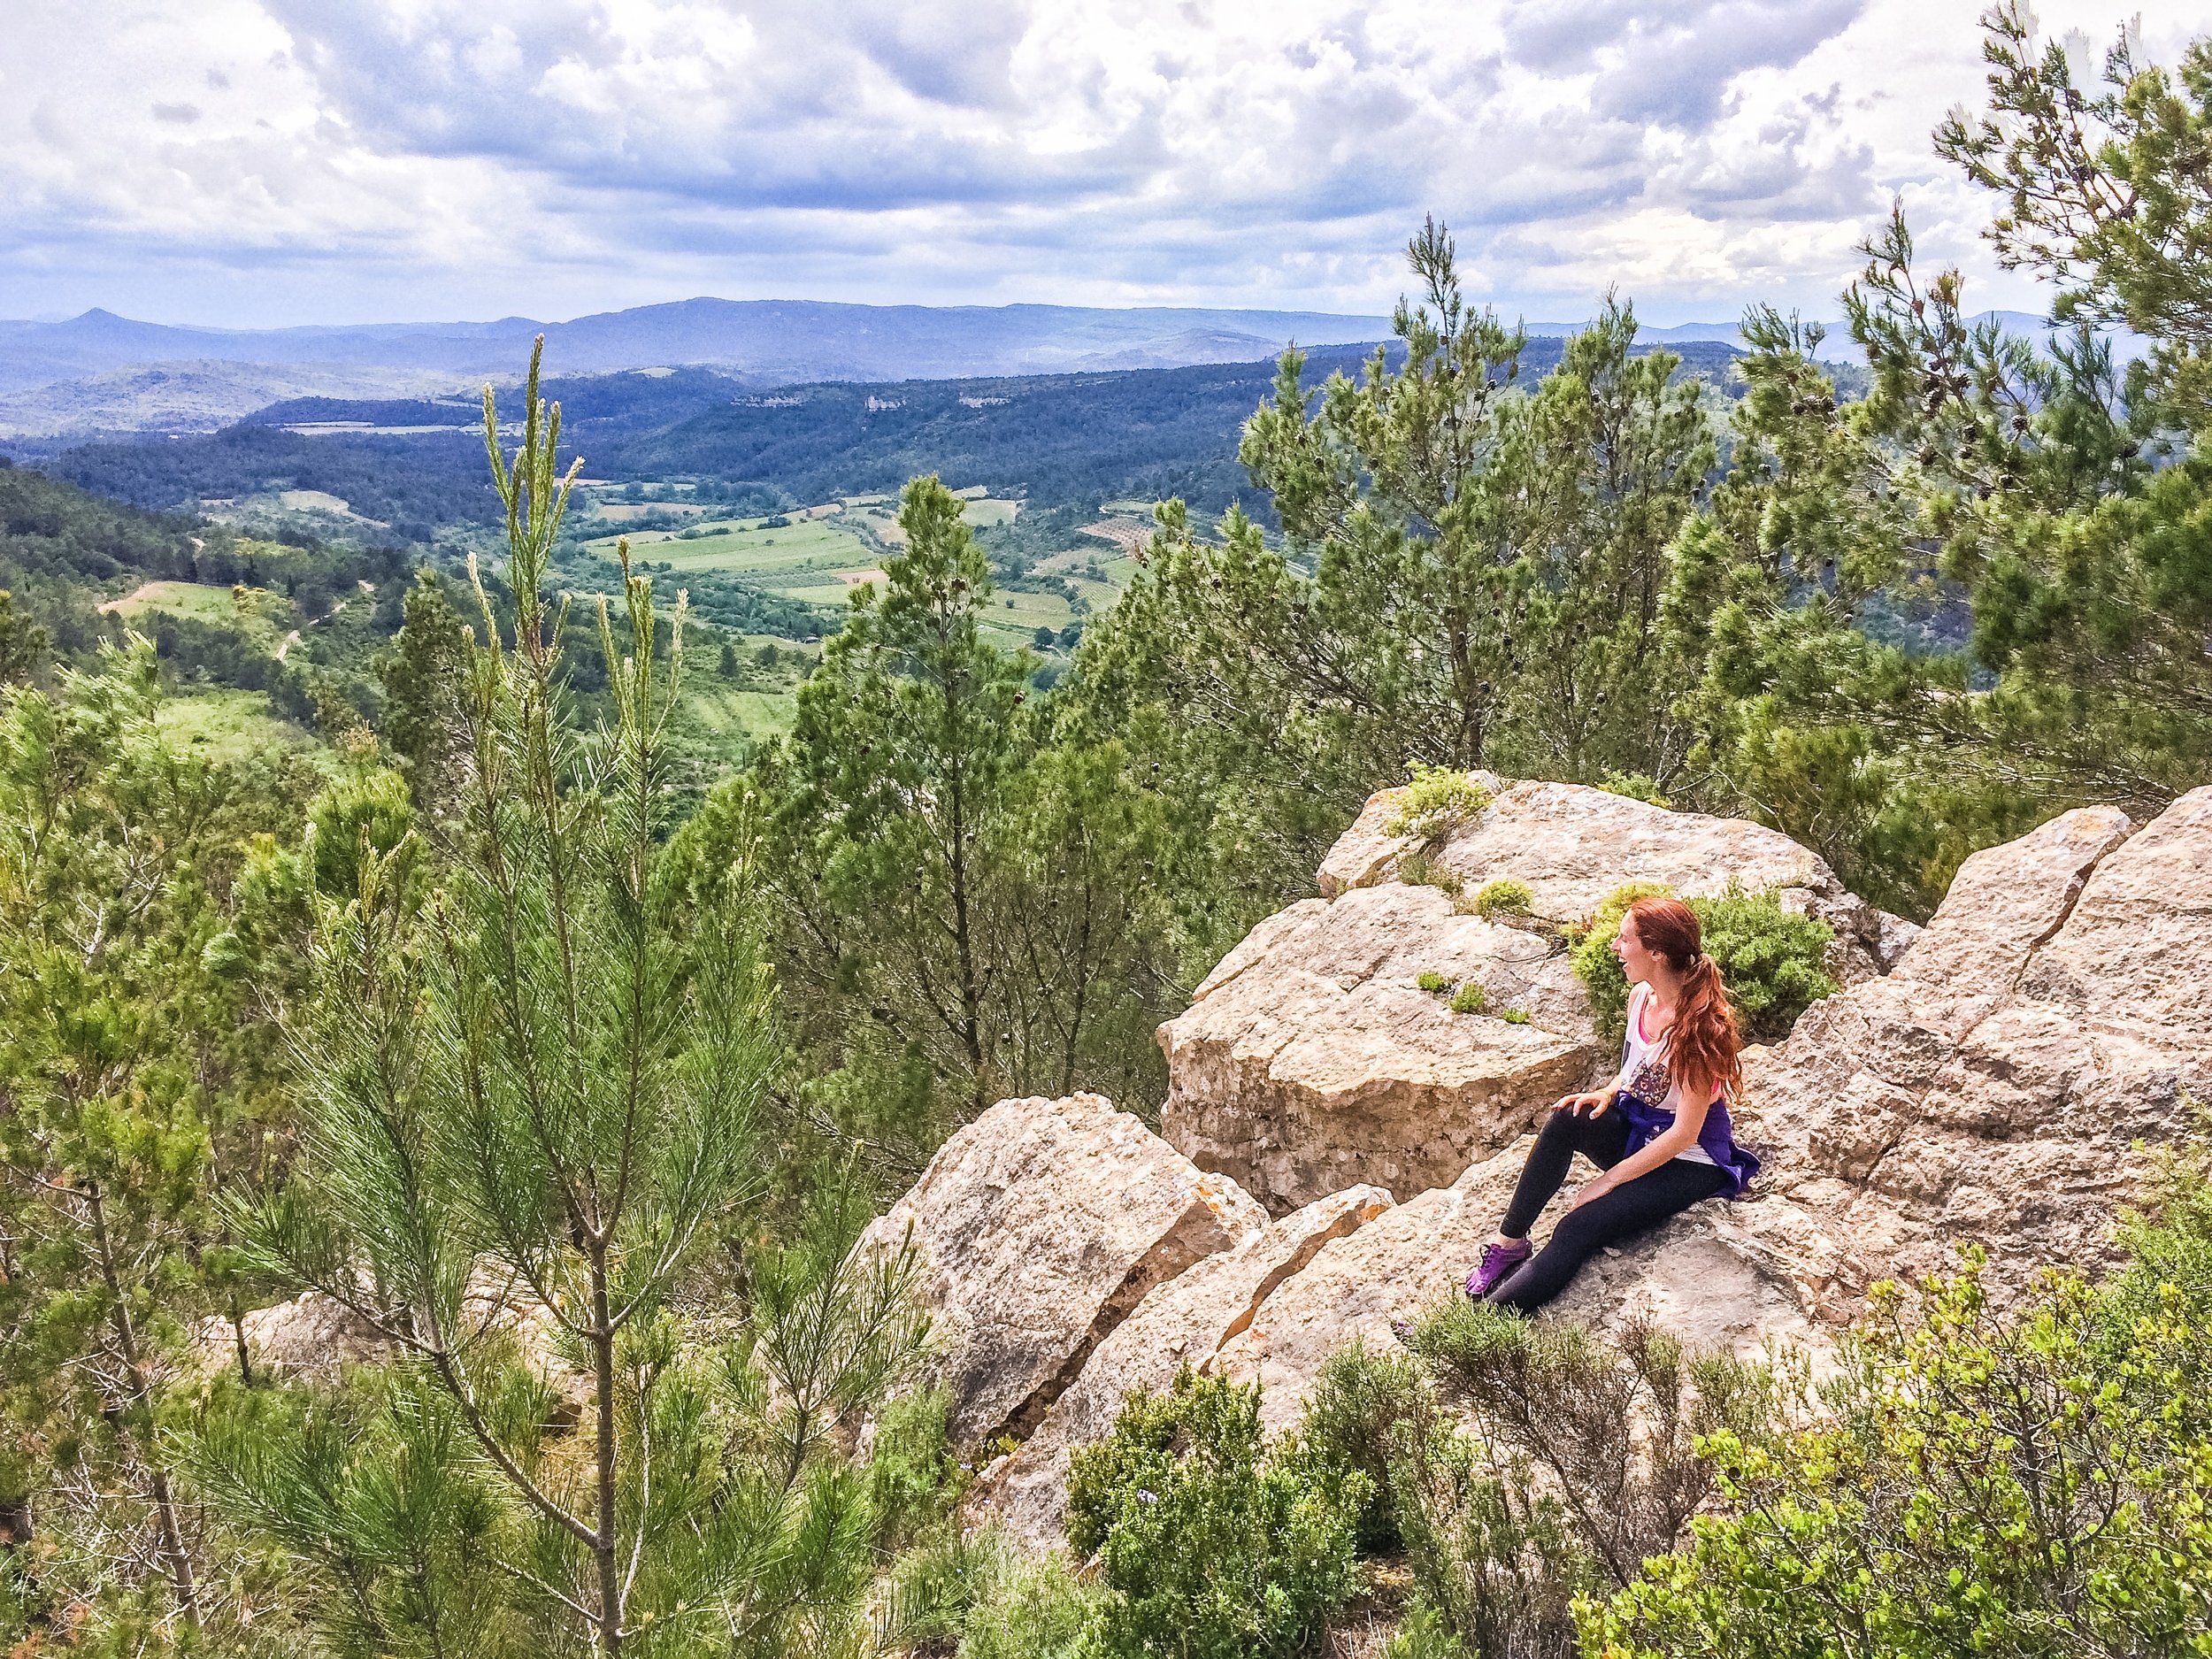  Hiking in Lagrasse, France 